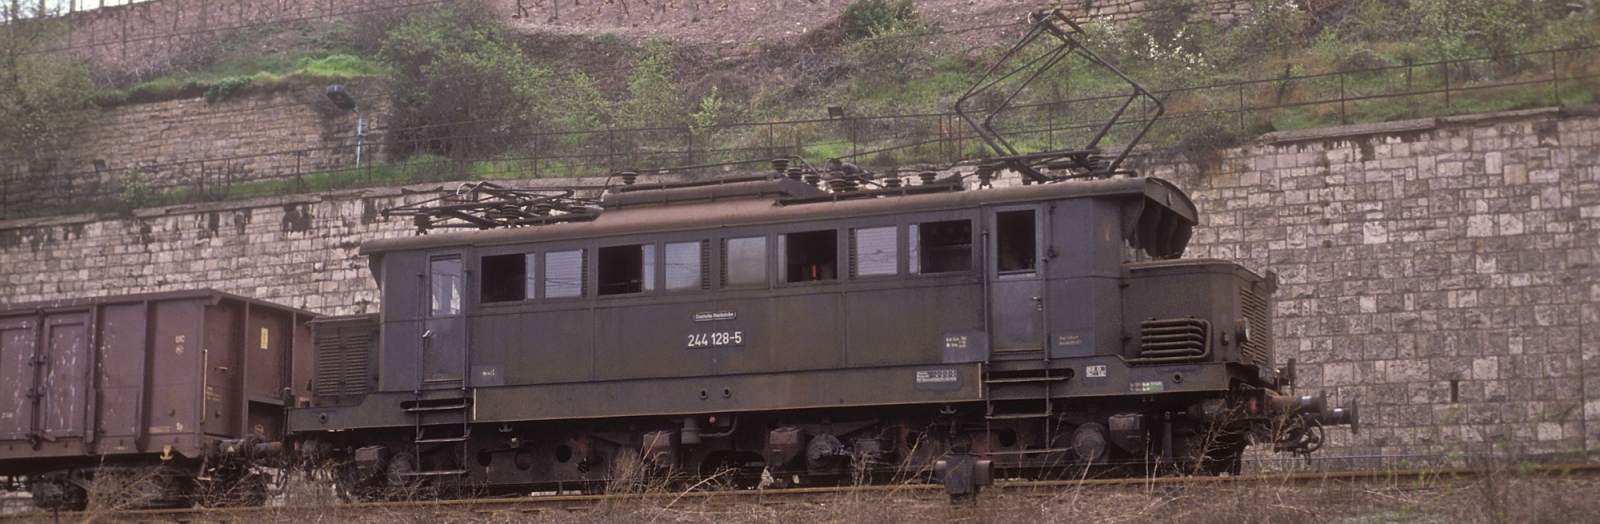 244 128 as one of the last pieces in April 1990 near Weißenfels